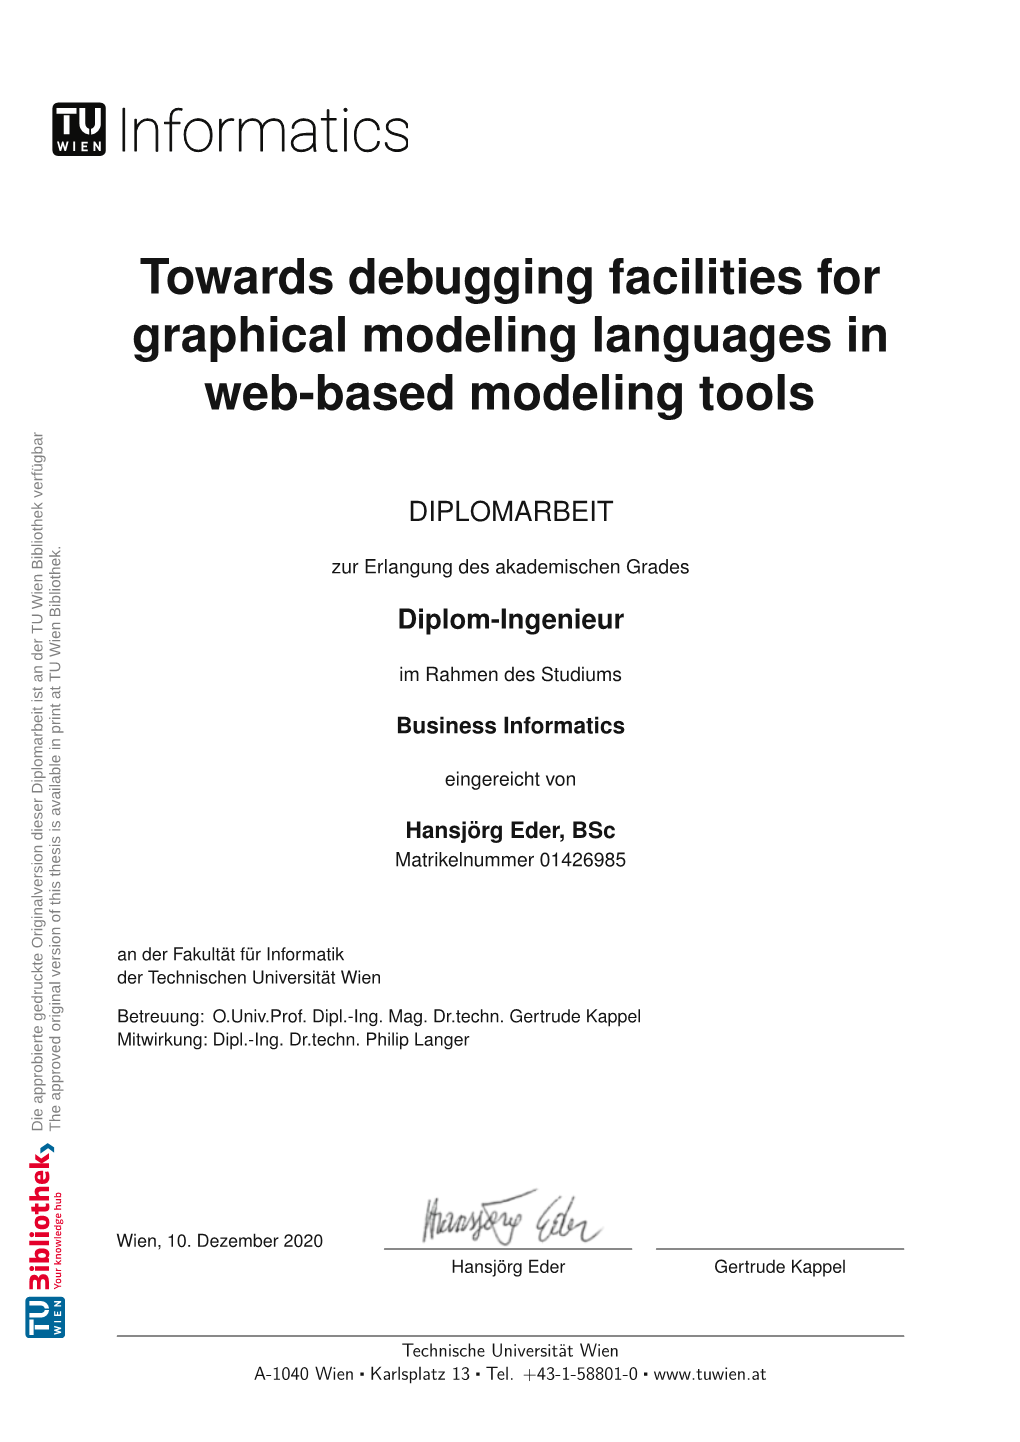 Towards Debugging Facilities for Graphical Modeling Languages in Web-Based Modeling Tools